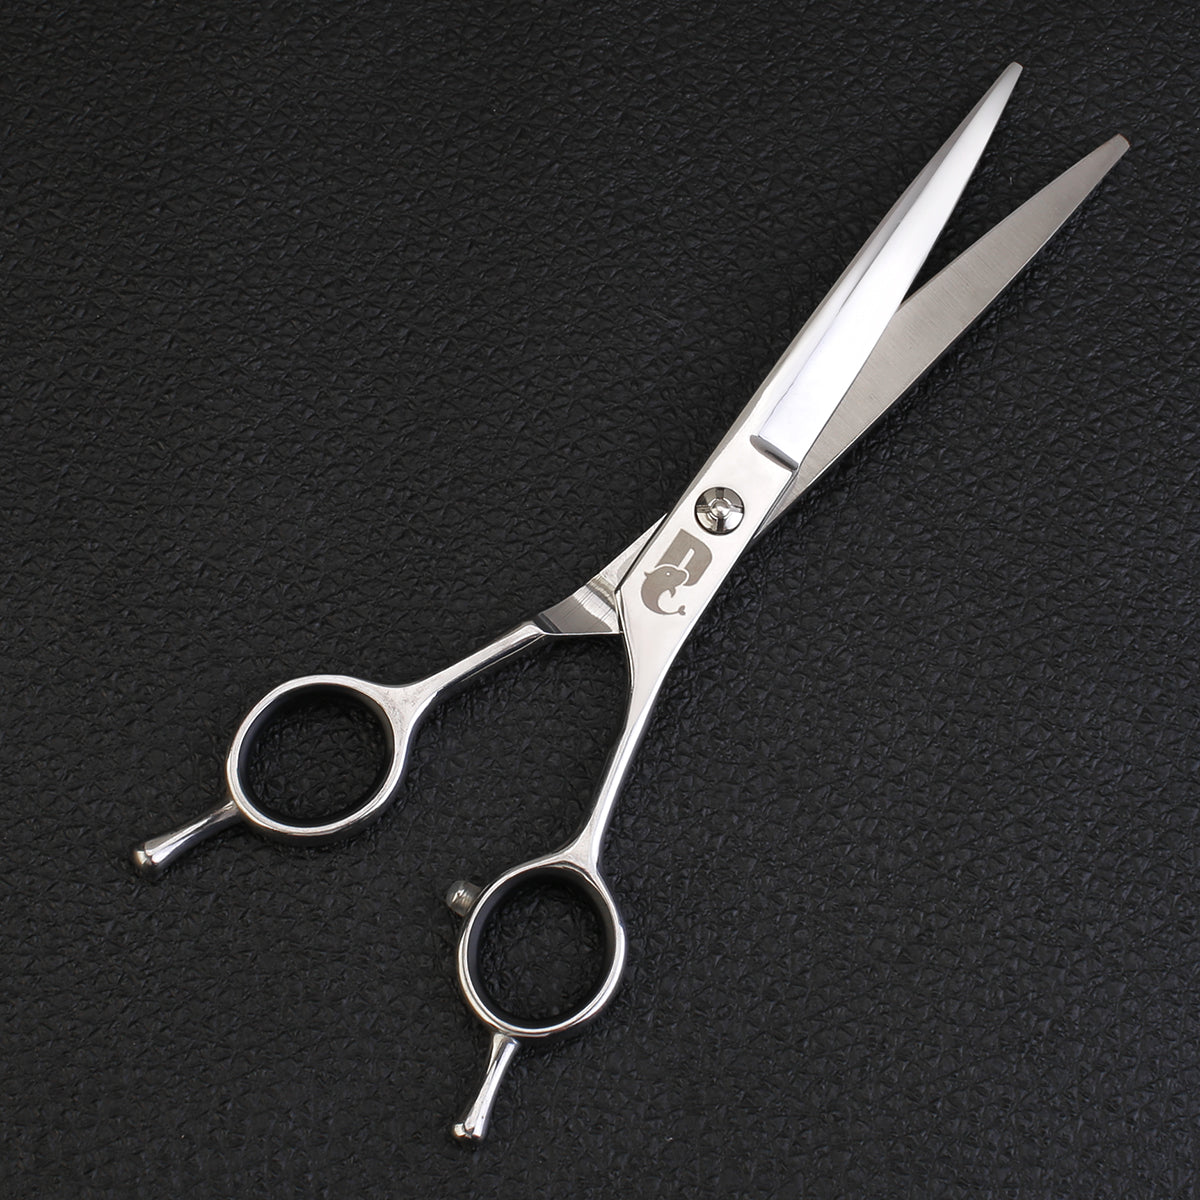 Affordable Dog Grooming Curved 7'' Scissors DC306